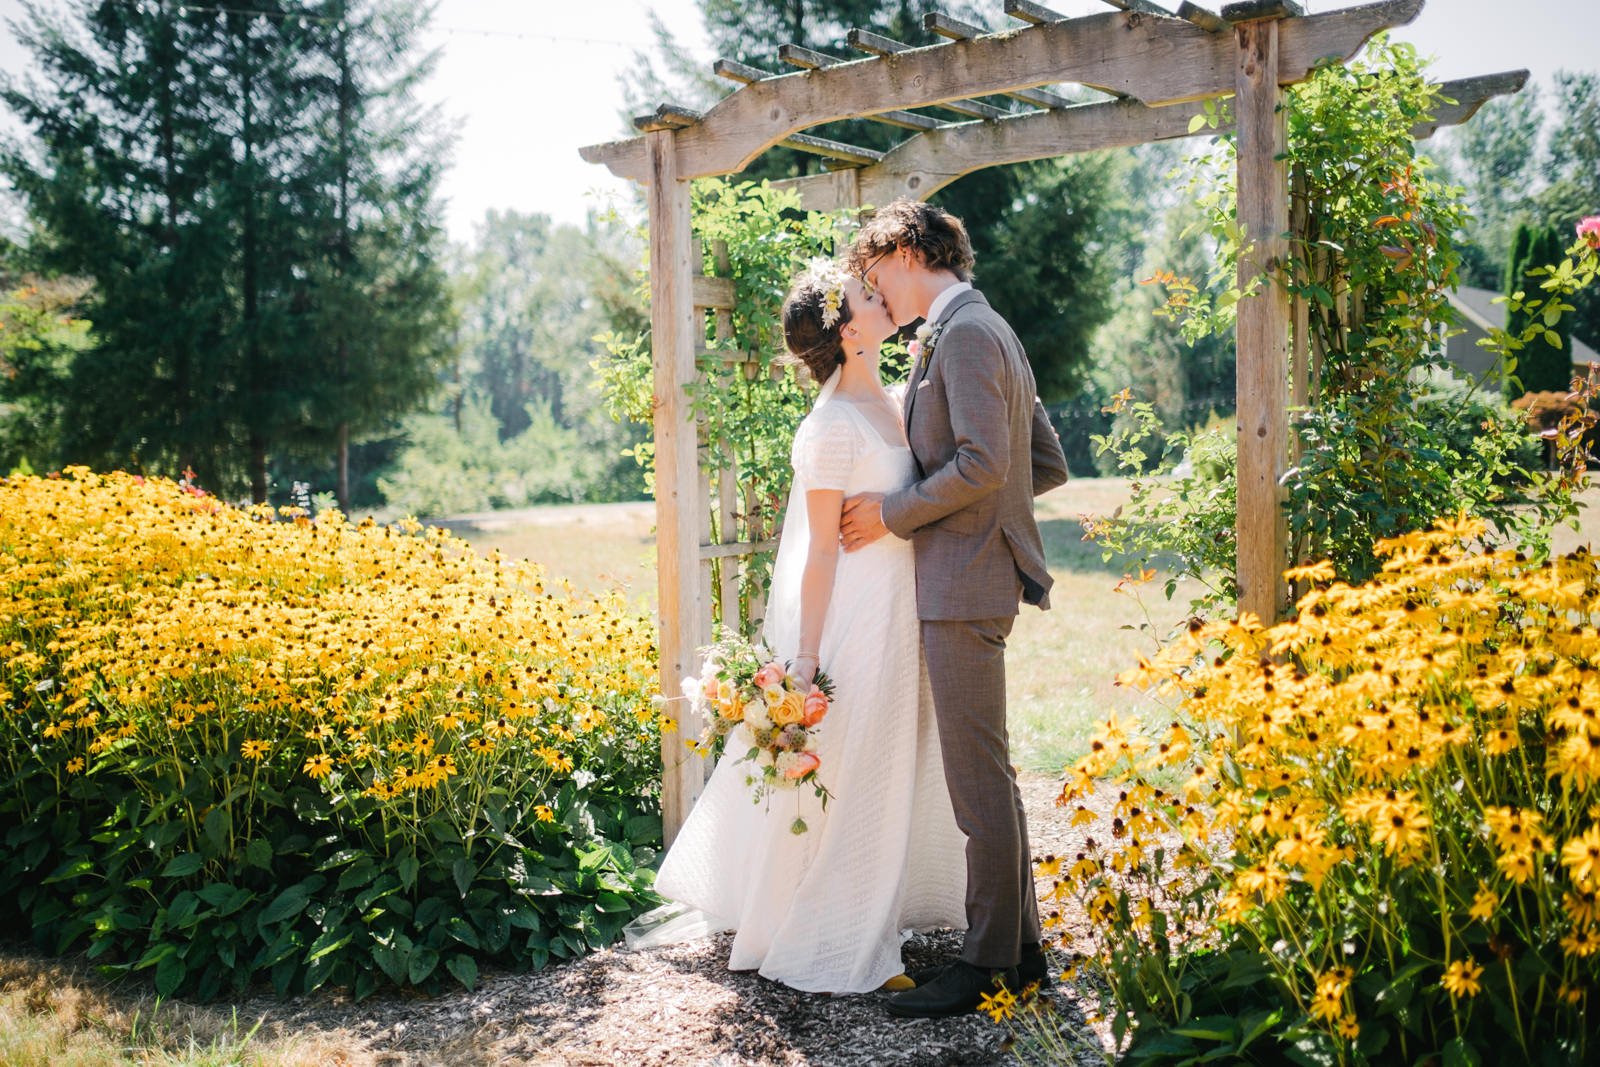  Bride and groom kiss under arbor surrounded by black eyed Susans holding colorful bouquet 